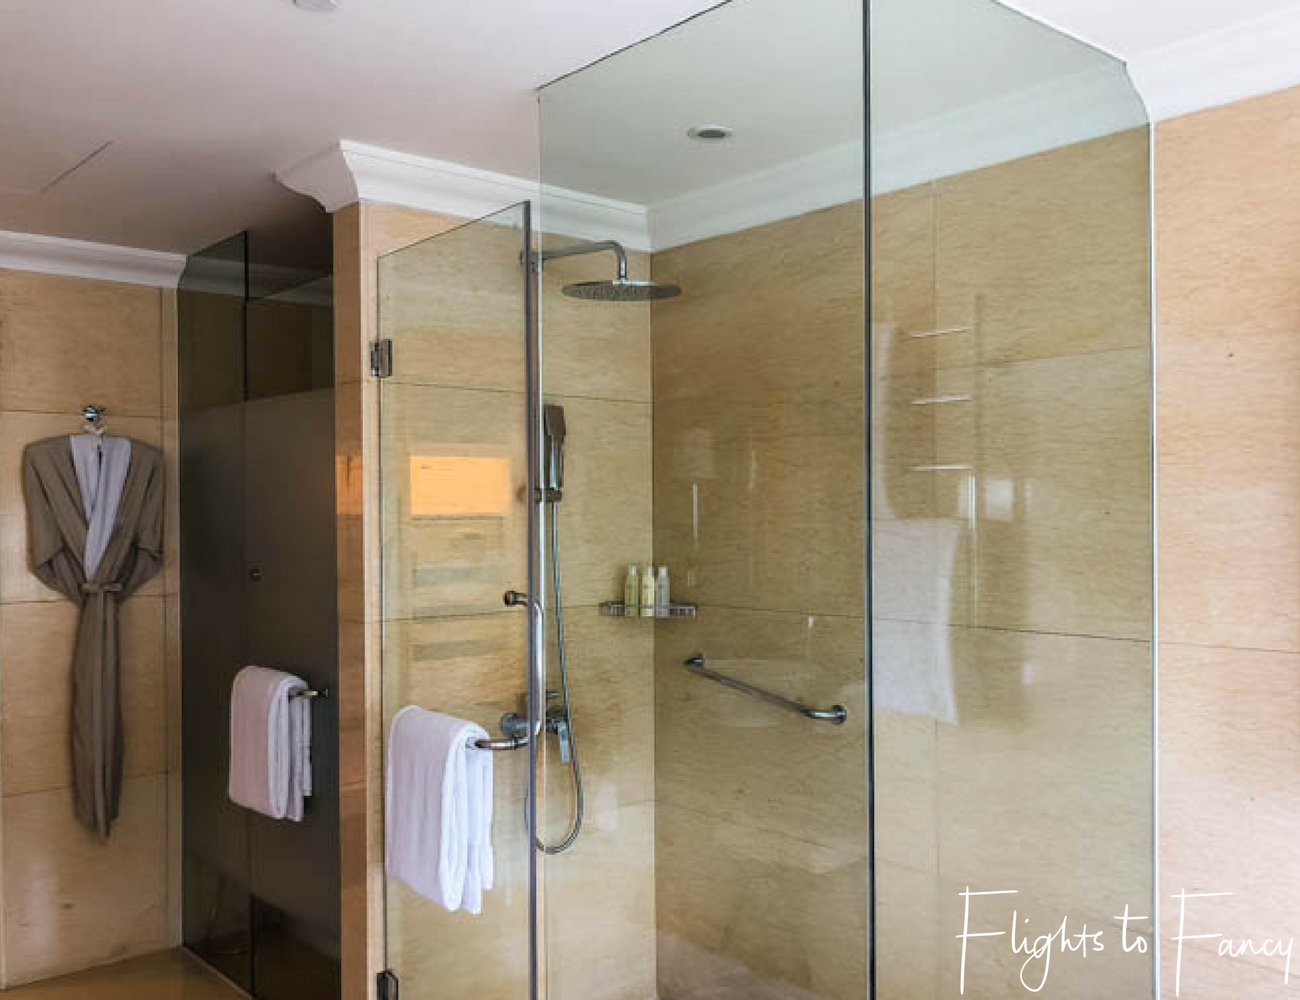 Flights To Fancy at Raffles Manila - The bathrooms are the best in five star hotels in Makati